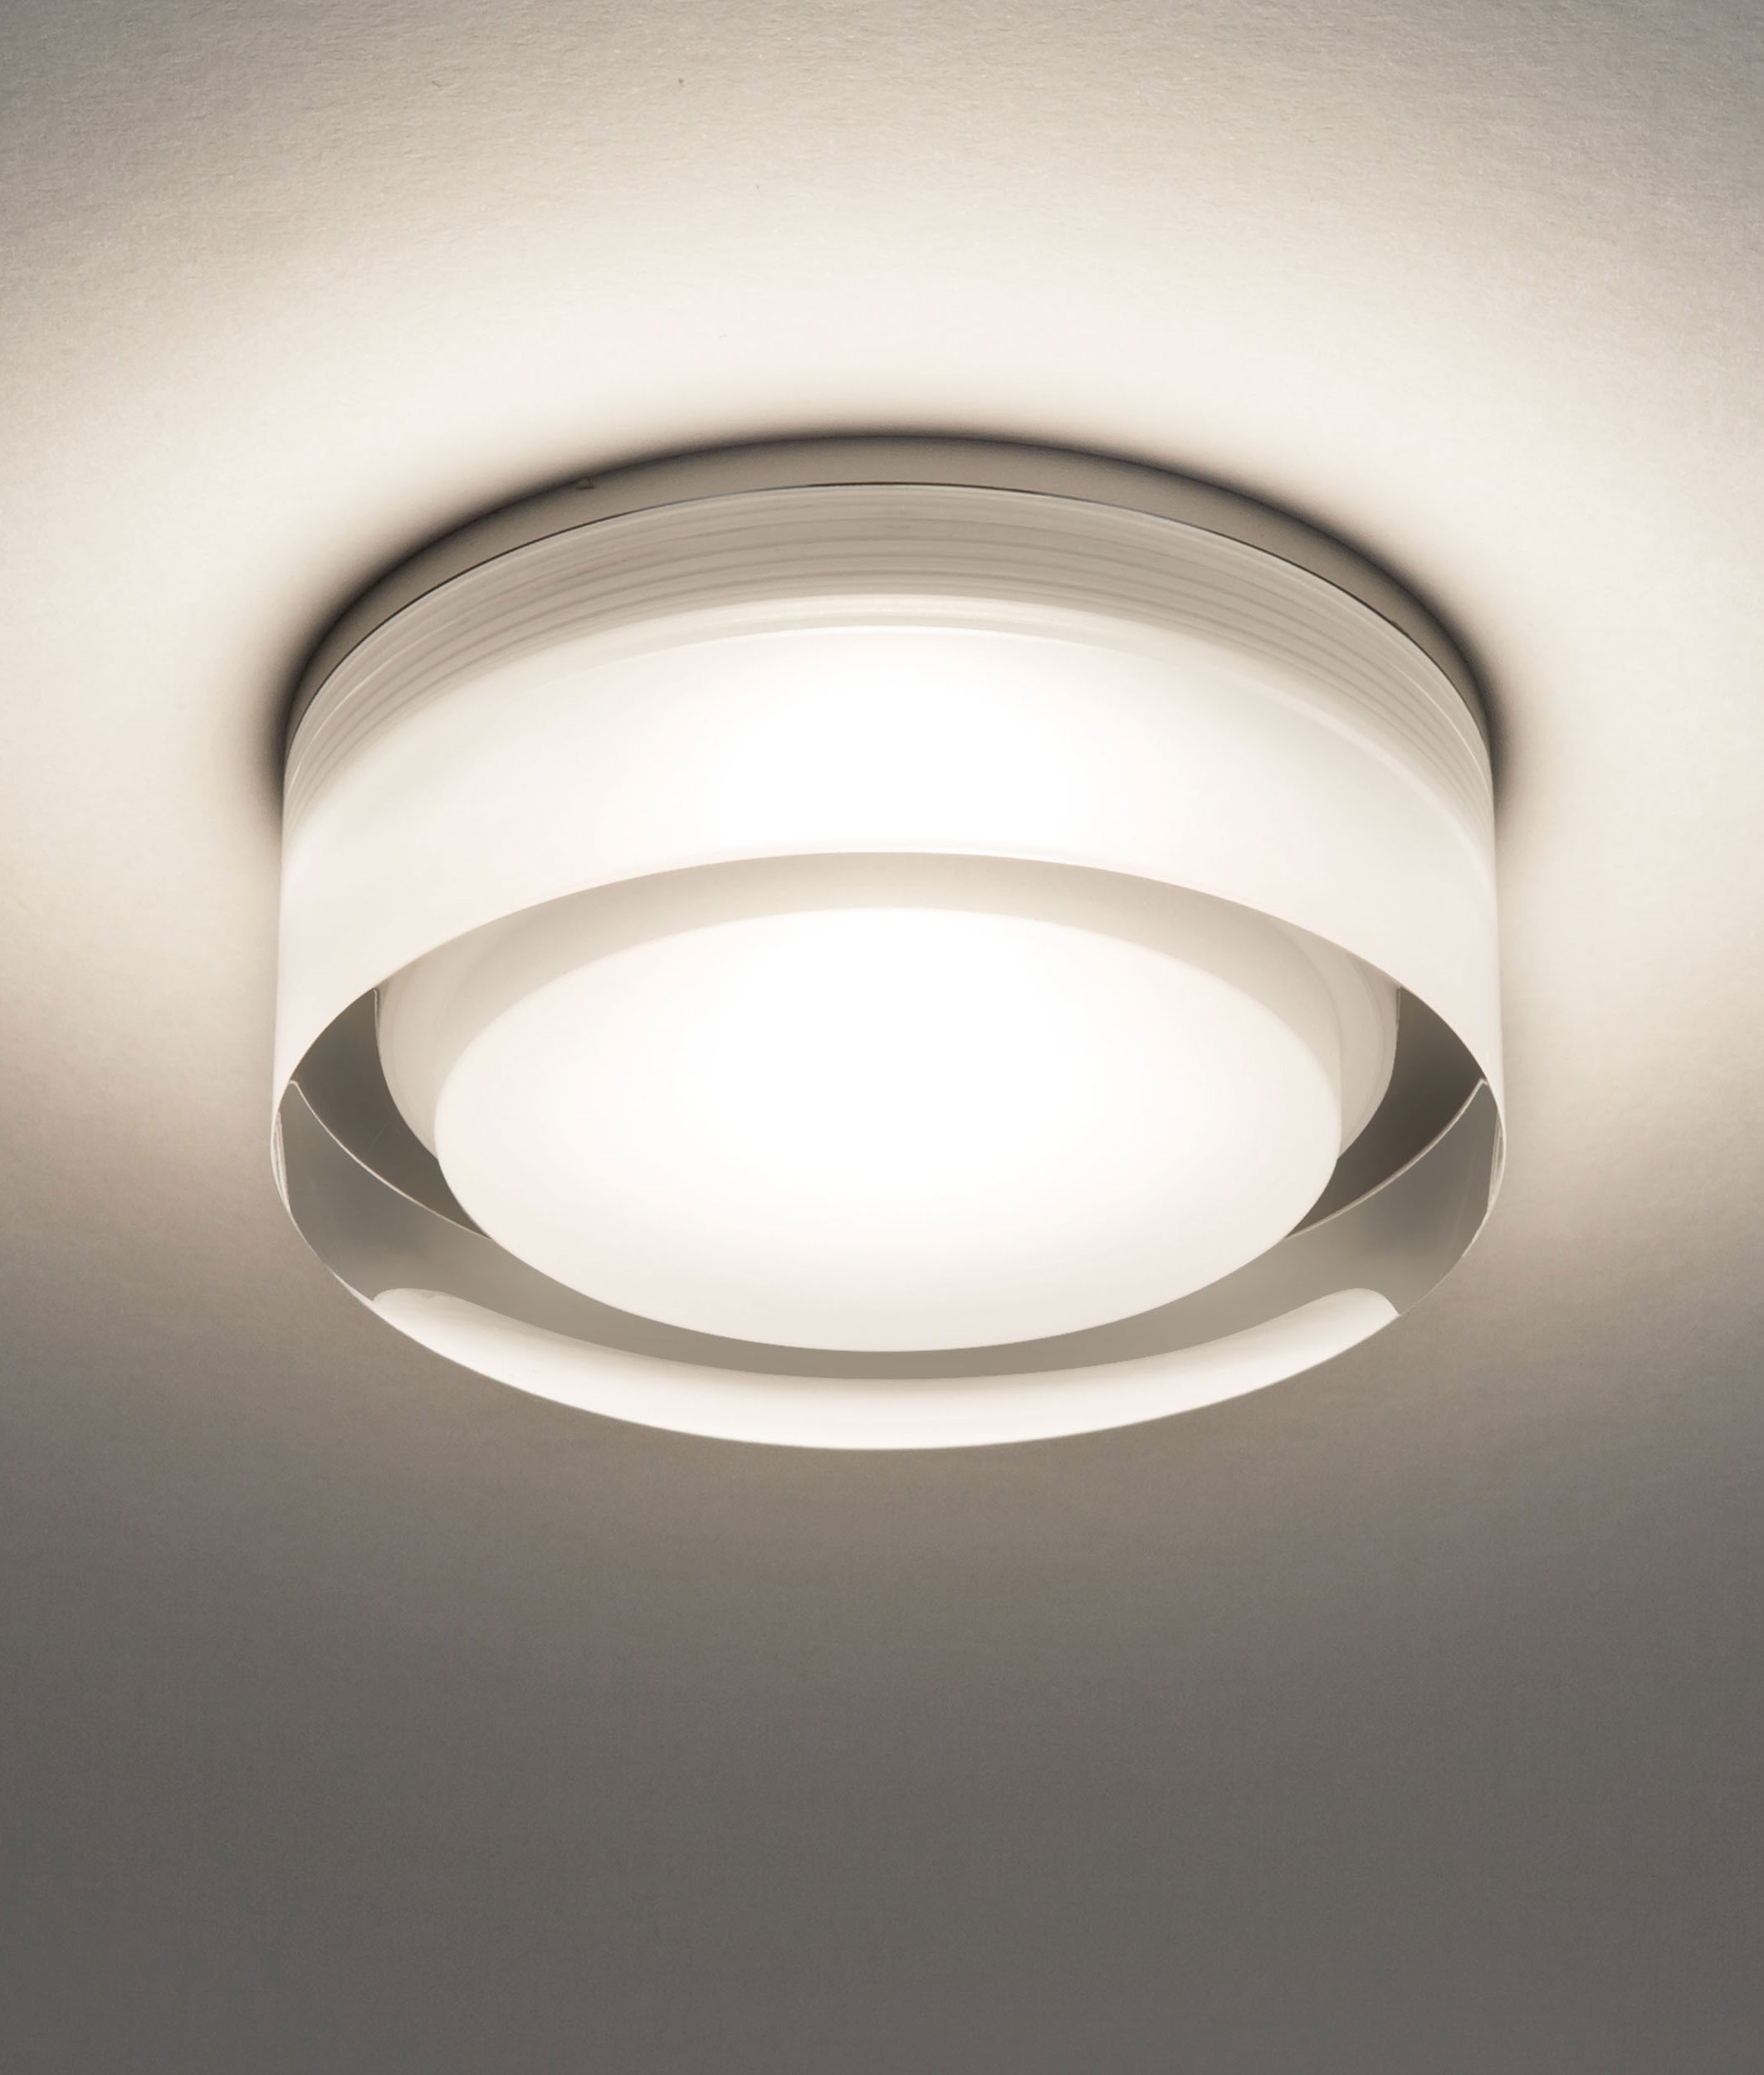 Led recessed ceiling lights for bathrooms